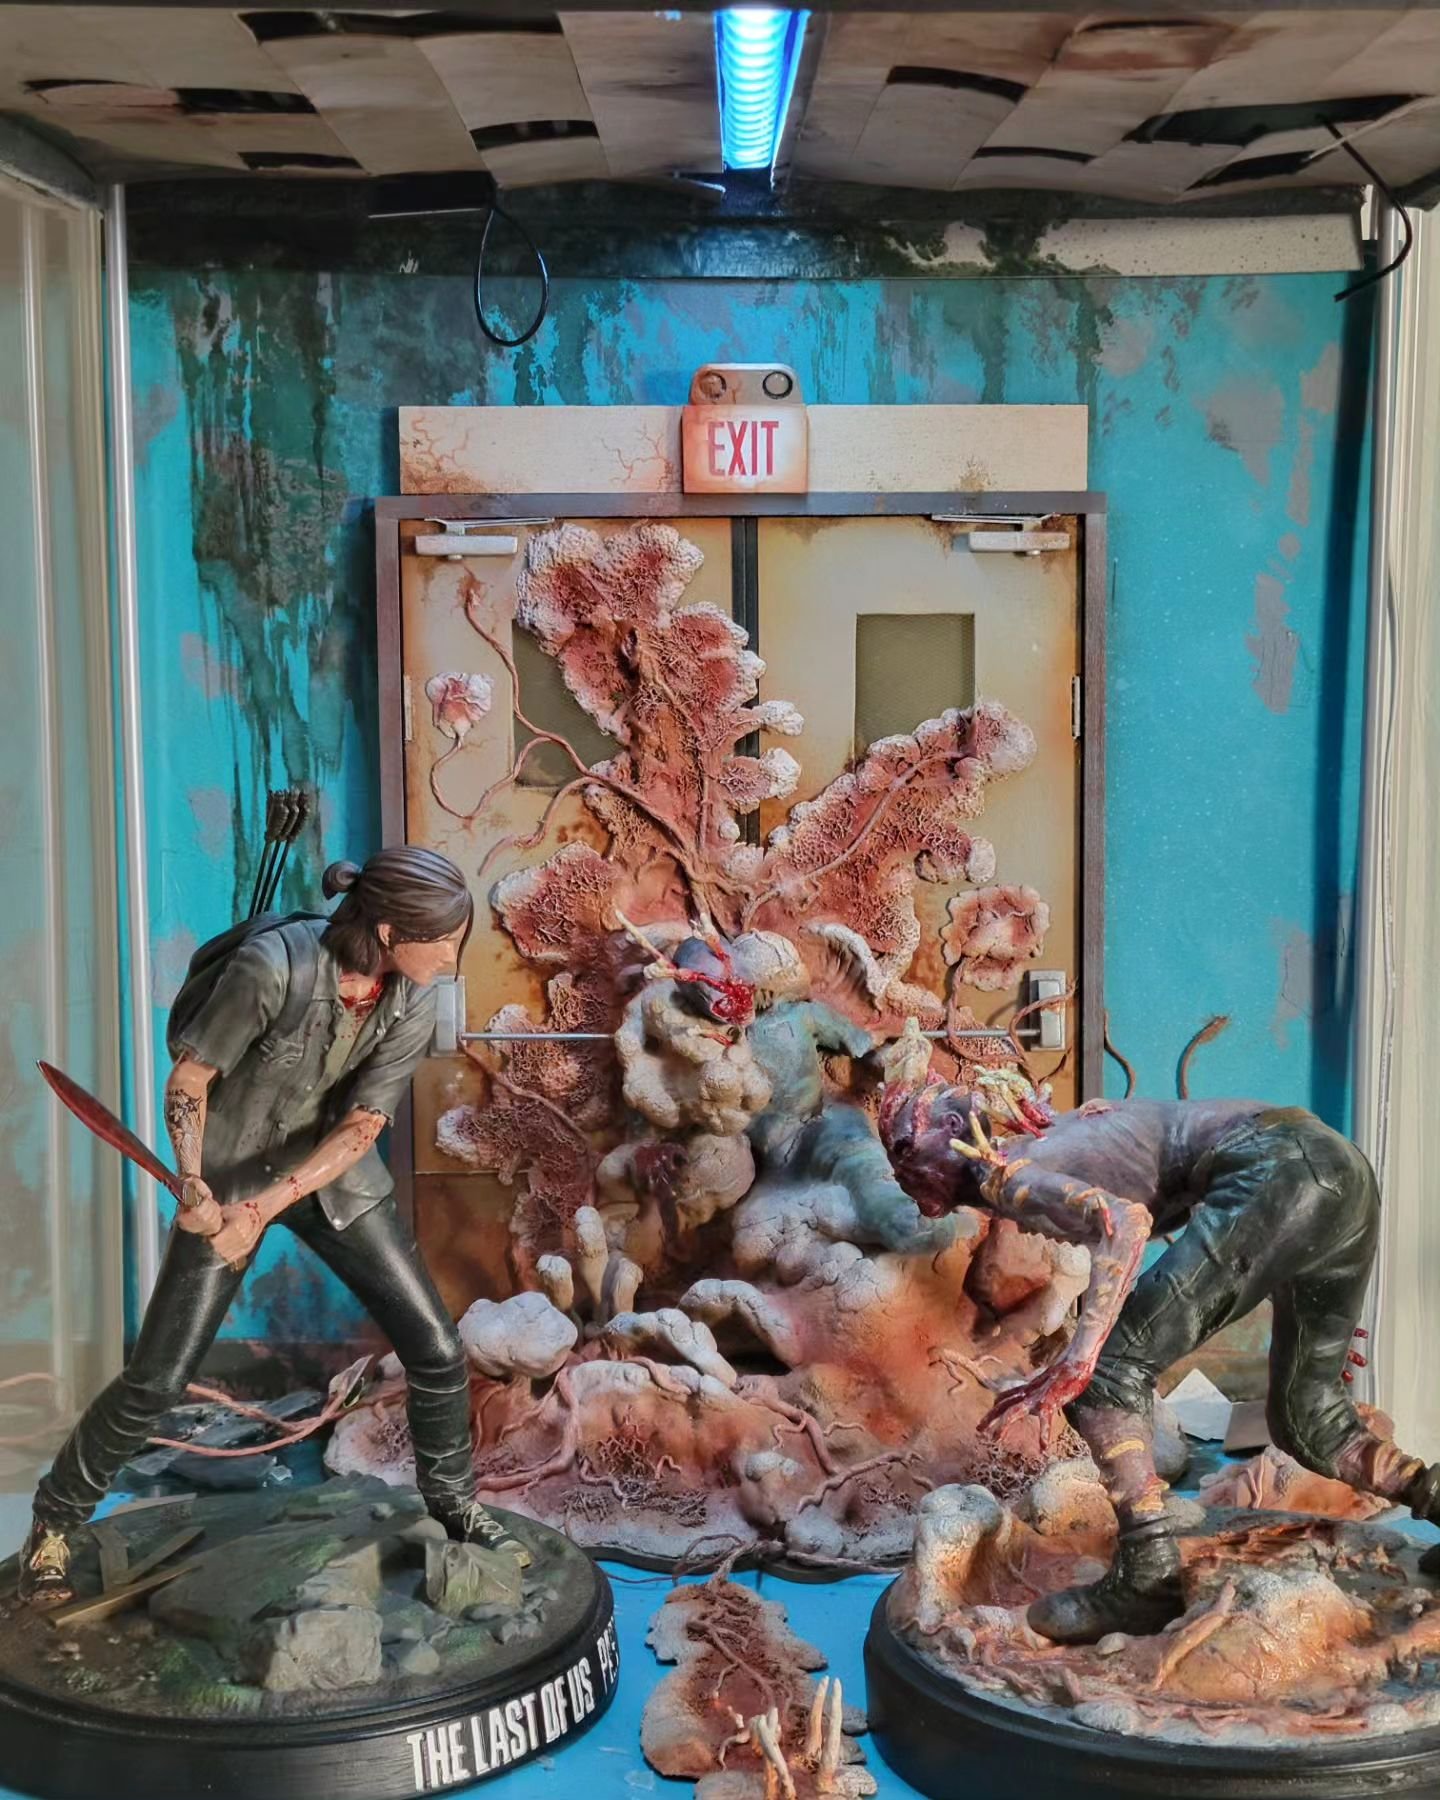 My Last of us 2 diorama and sculpture pieces. 3 years ago today came the best ps4 game ever! 

Slide 1 - Stalkers in the office
Slide 2 - Clicker chasing Abby (Chinatown)

Happy 3 years! 🤙Thank you @druckmann for giving the world such an incredible 